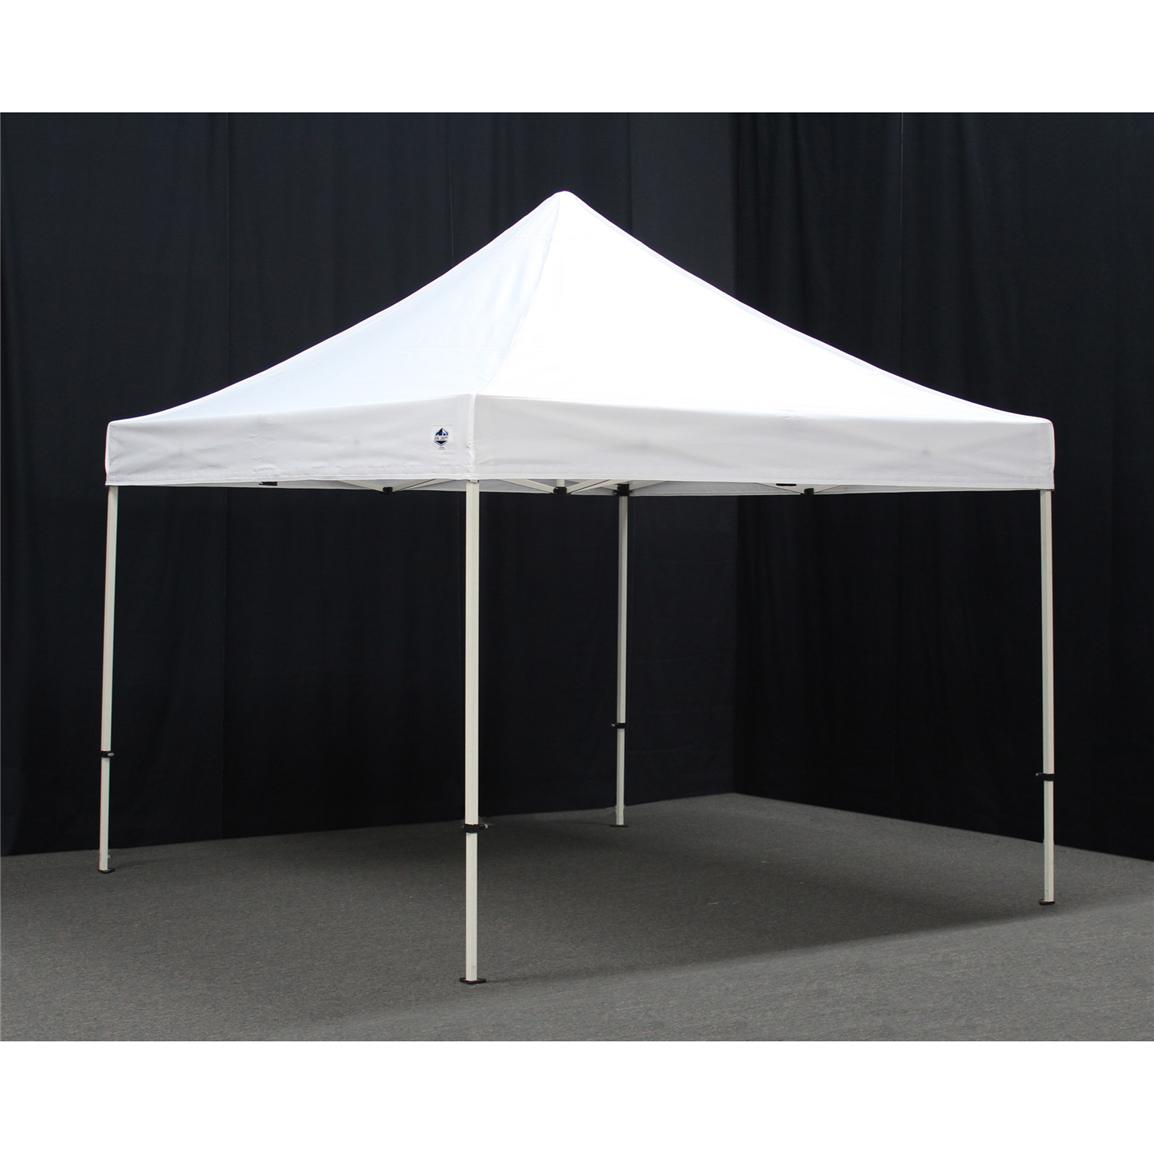  Tents additionally Party Rental Tables And Chairs. on party canopy